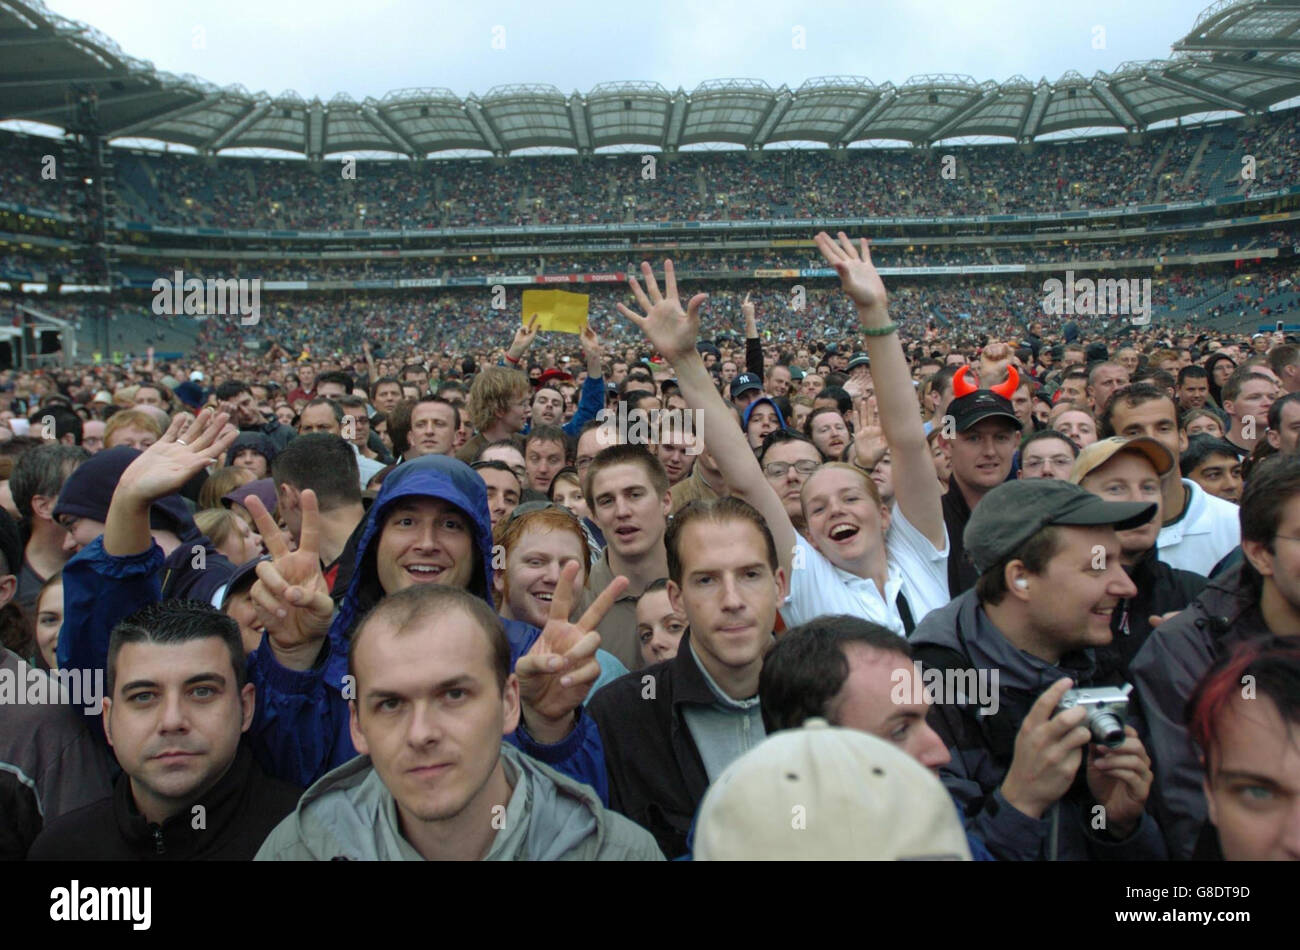 U2 Concert, Croke Park. Fans stand in light drizzle before U2 perform. Stock Photo